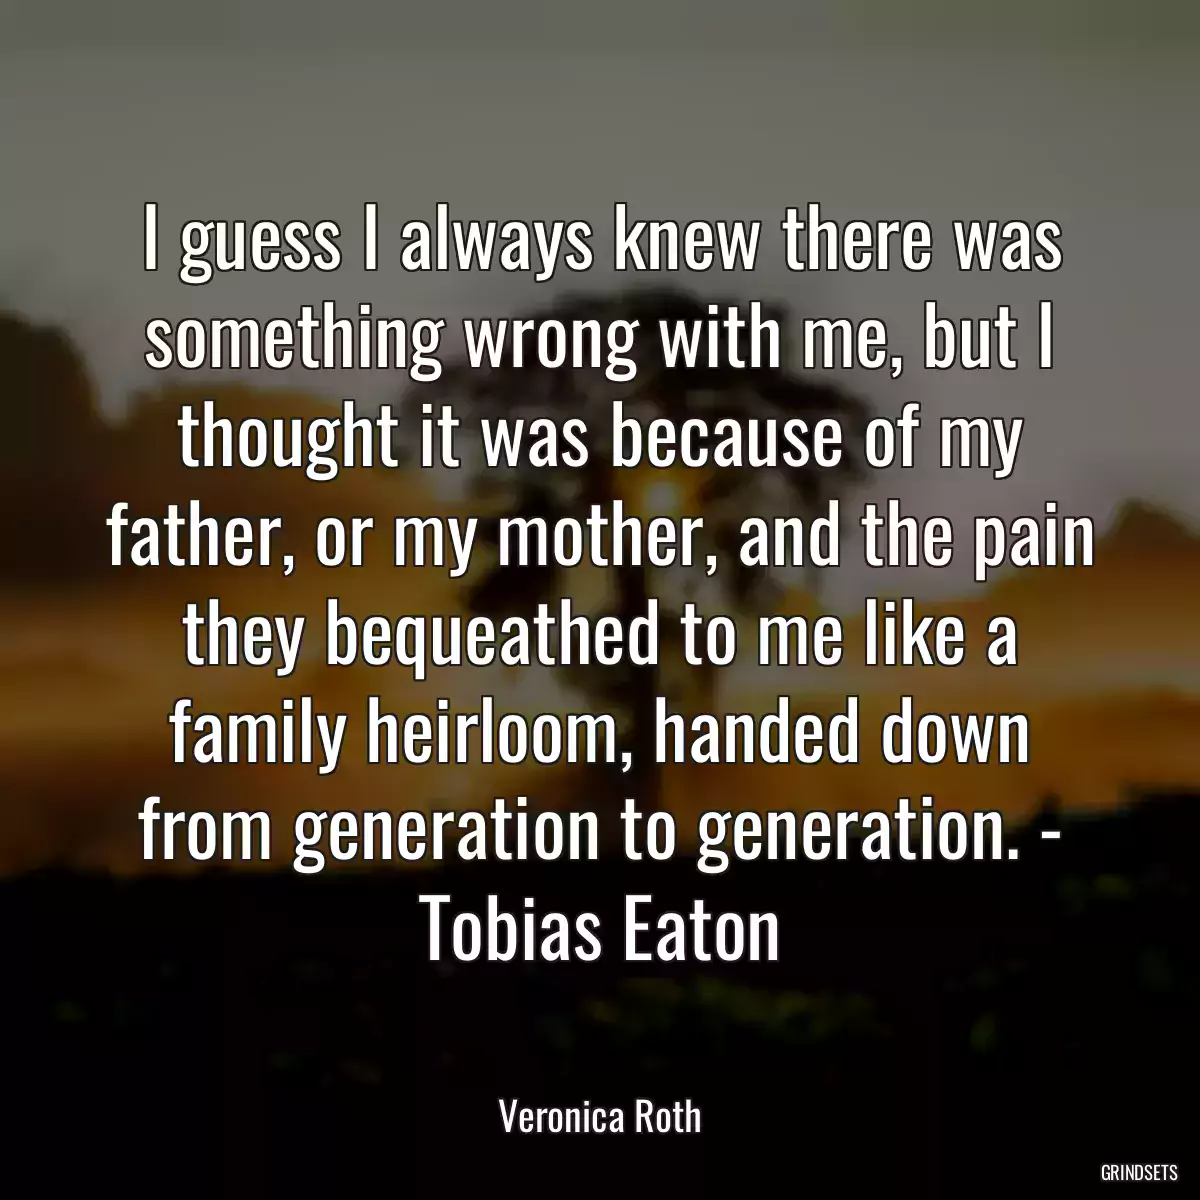 I guess I always knew there was something wrong with me, but I thought it was because of my father, or my mother, and the pain they bequeathed to me like a family heirloom, handed down from generation to generation. - Tobias Eaton